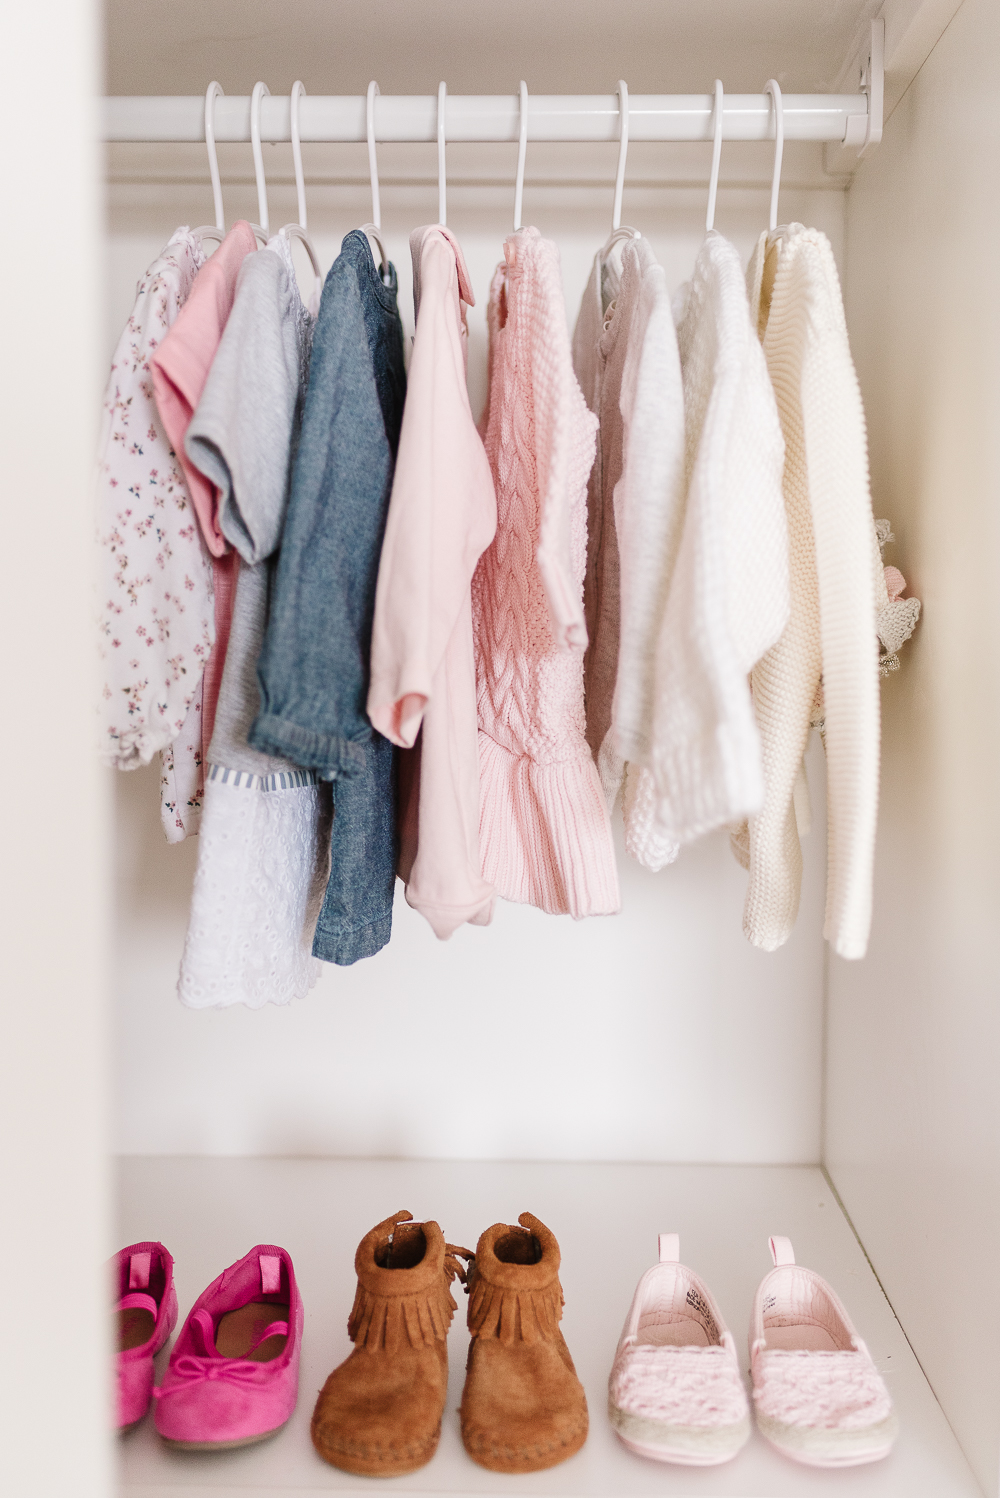 DIY Kids Closet Makeover with Kid-Friendly Organization - Live Pretty on a  Penny